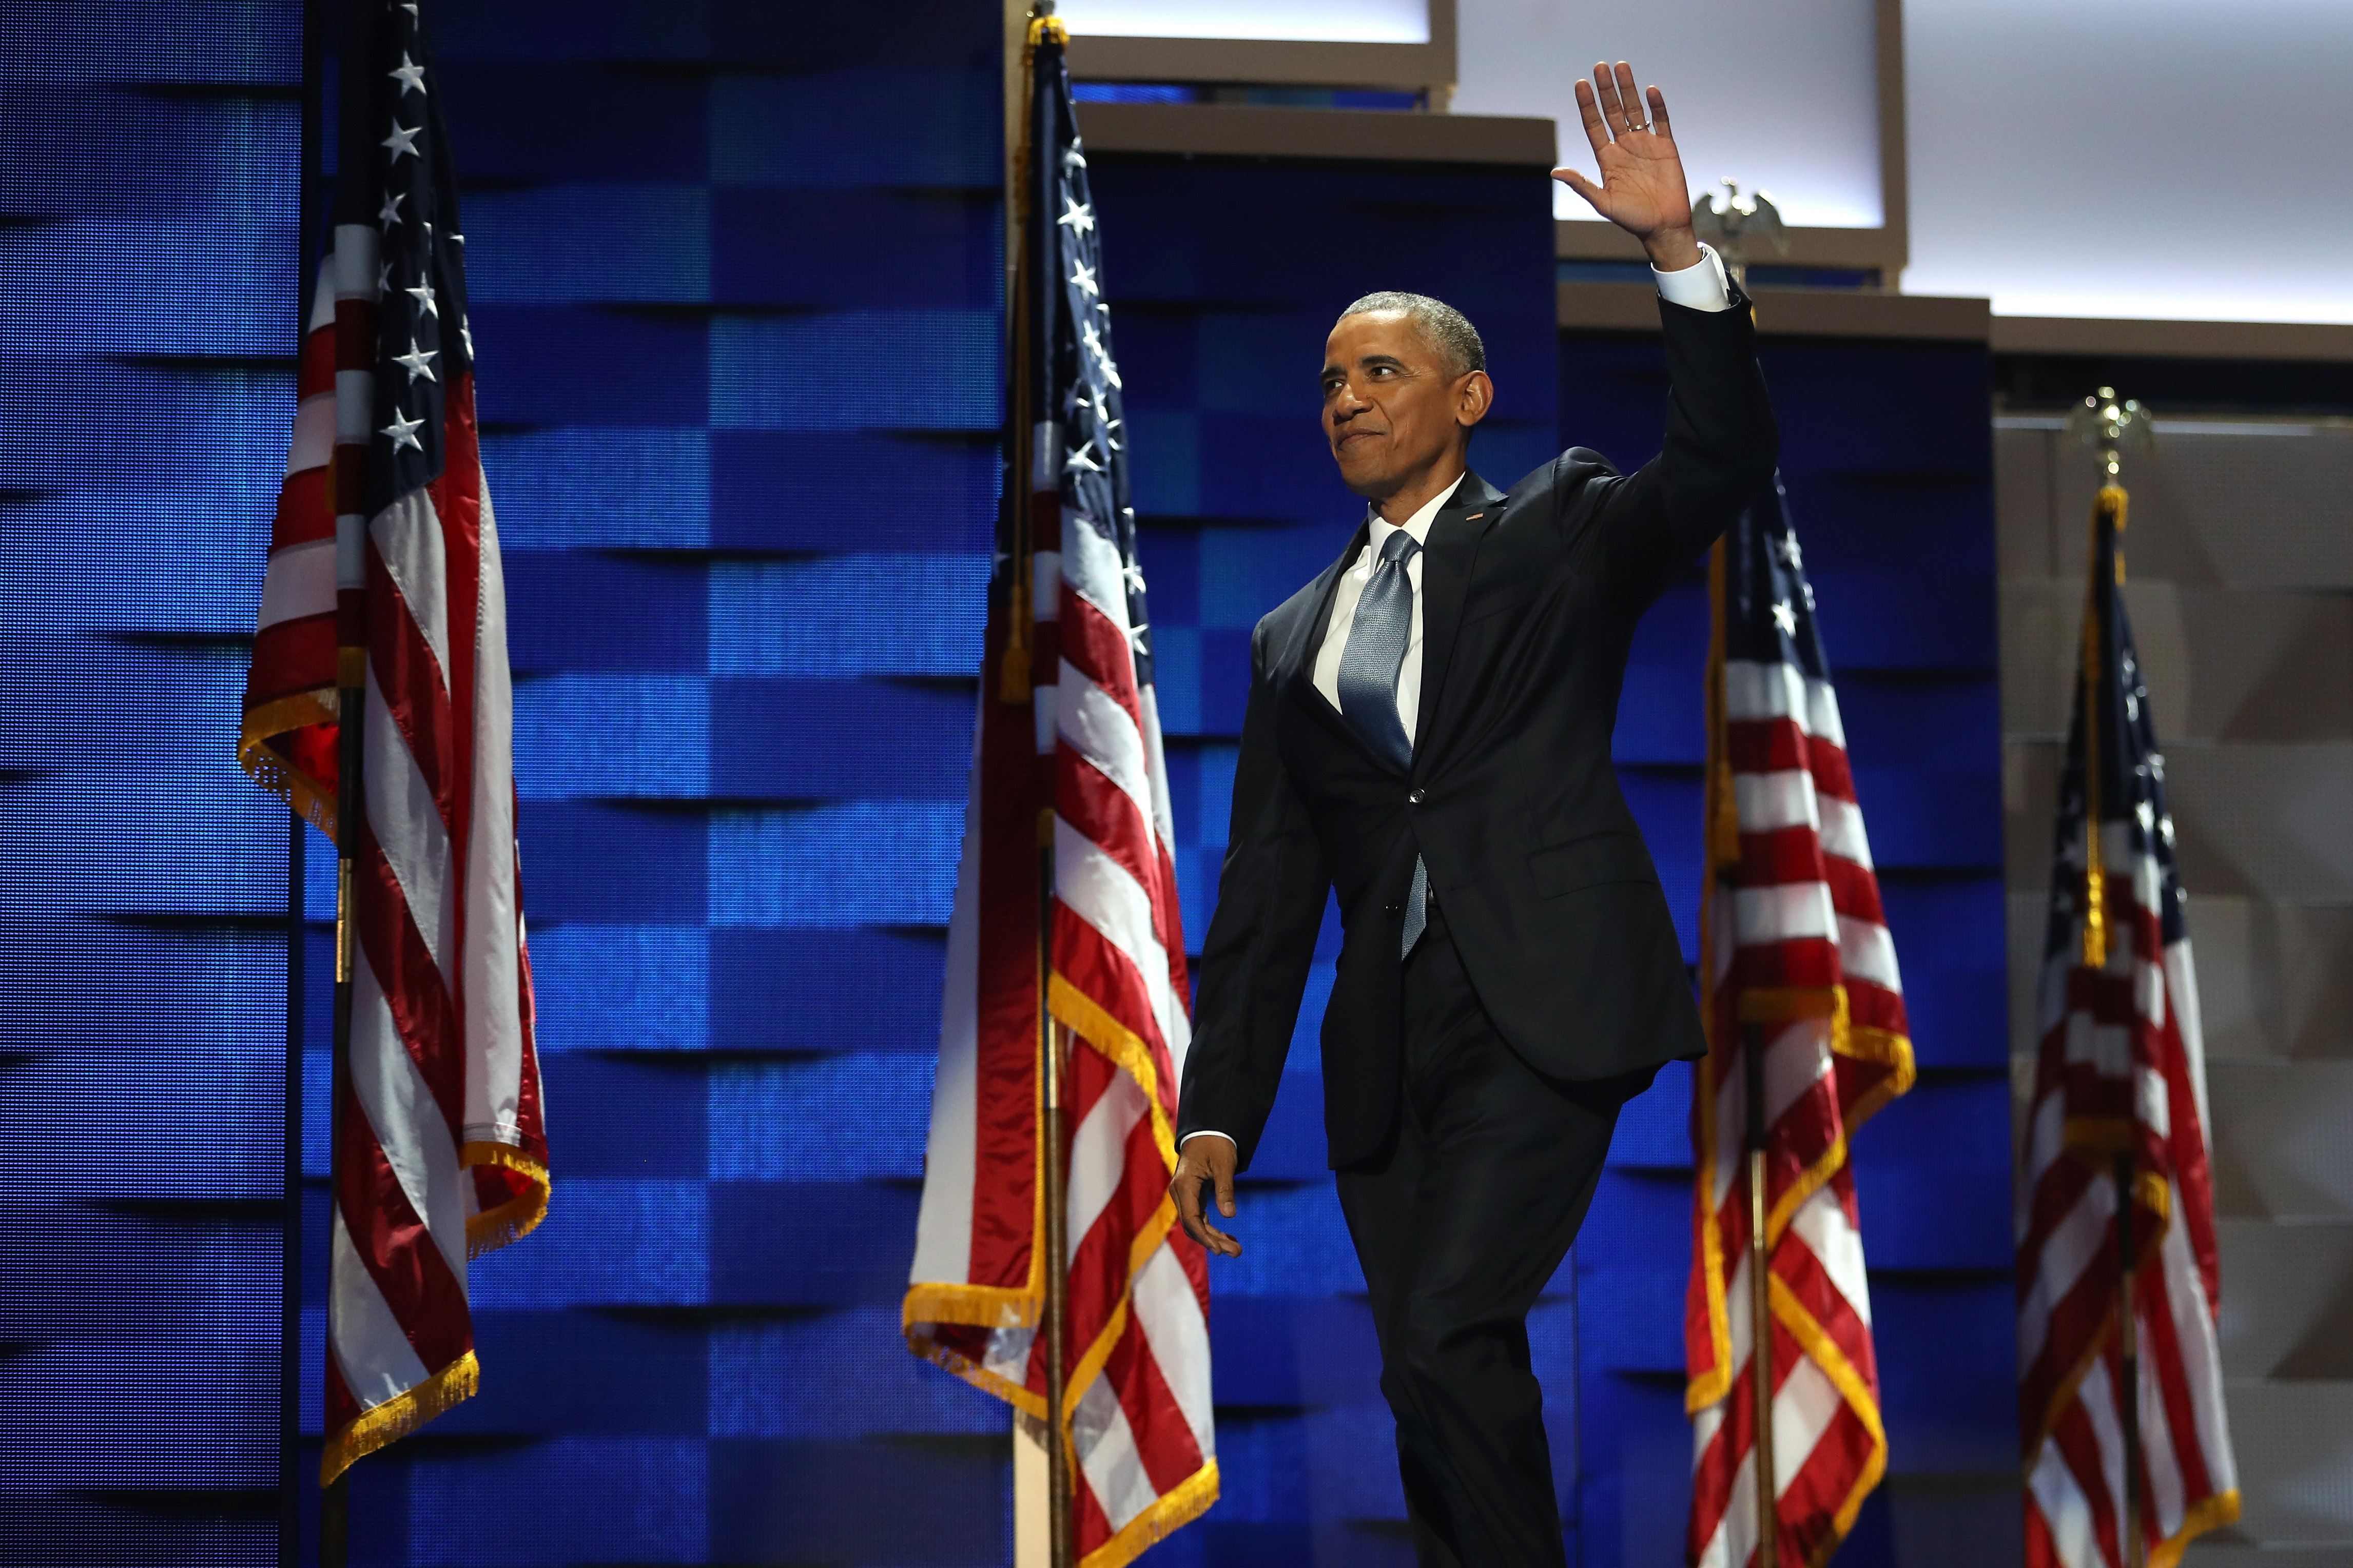 President Barack Obama acknowledges the crowd as he arrives on stage to deliver remarks on the third day of the Democratic National Convention at the Wells Fargo Center on July 27, 2016 in Philadelphia, Penn. (Joe Raedle/Getty Images)